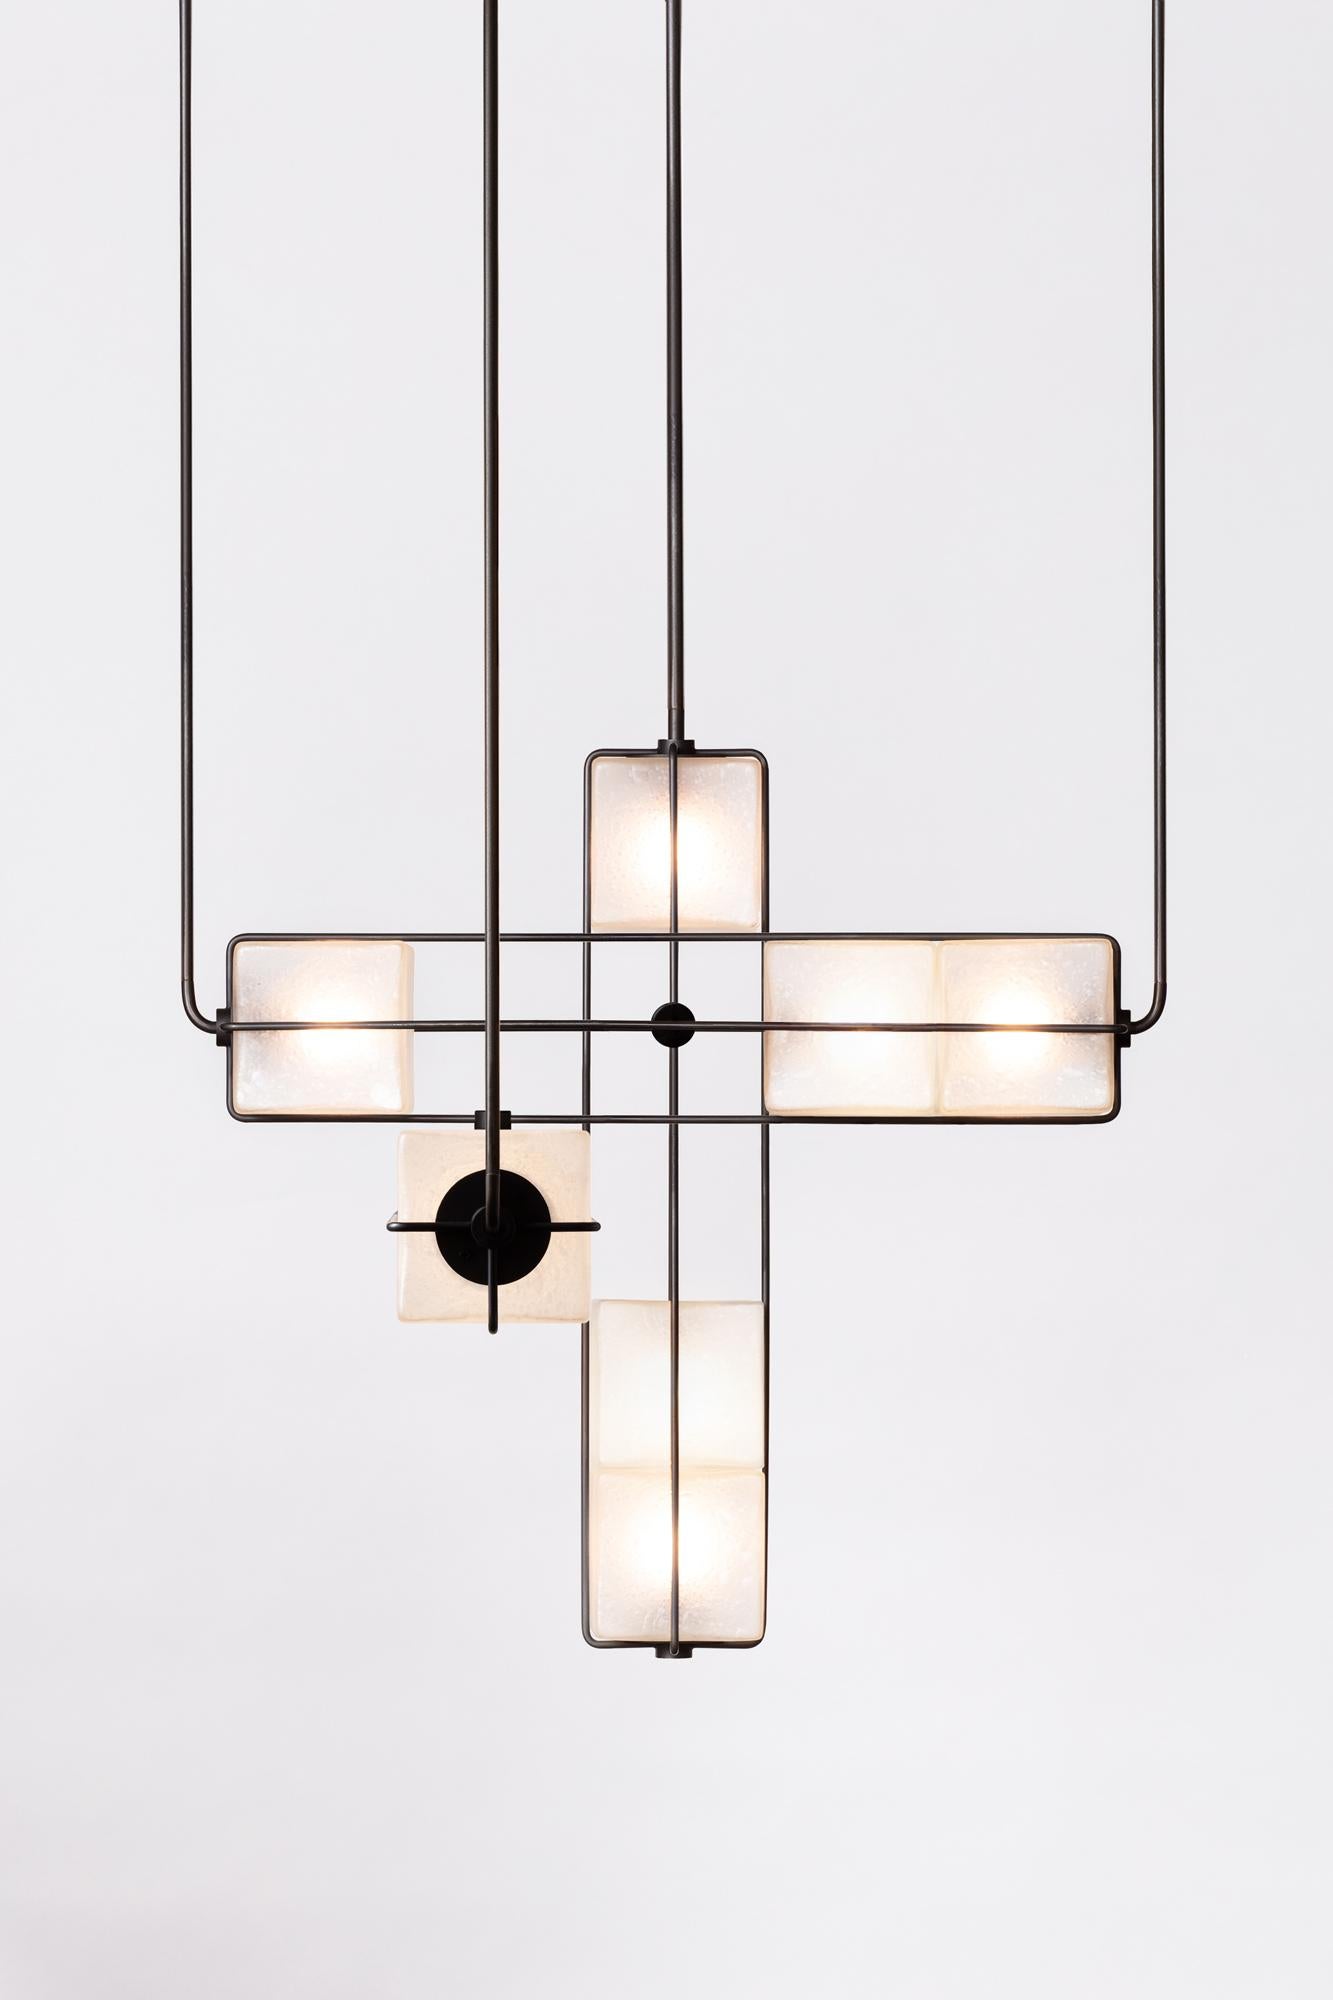 The Alice collection is inspired by Brutalist modular architecture. The textured hand blown glass cubes are sandblasted to create a soft glow and stacked together to diffuse light in different intensities. The frame is made of solid brass, finishes